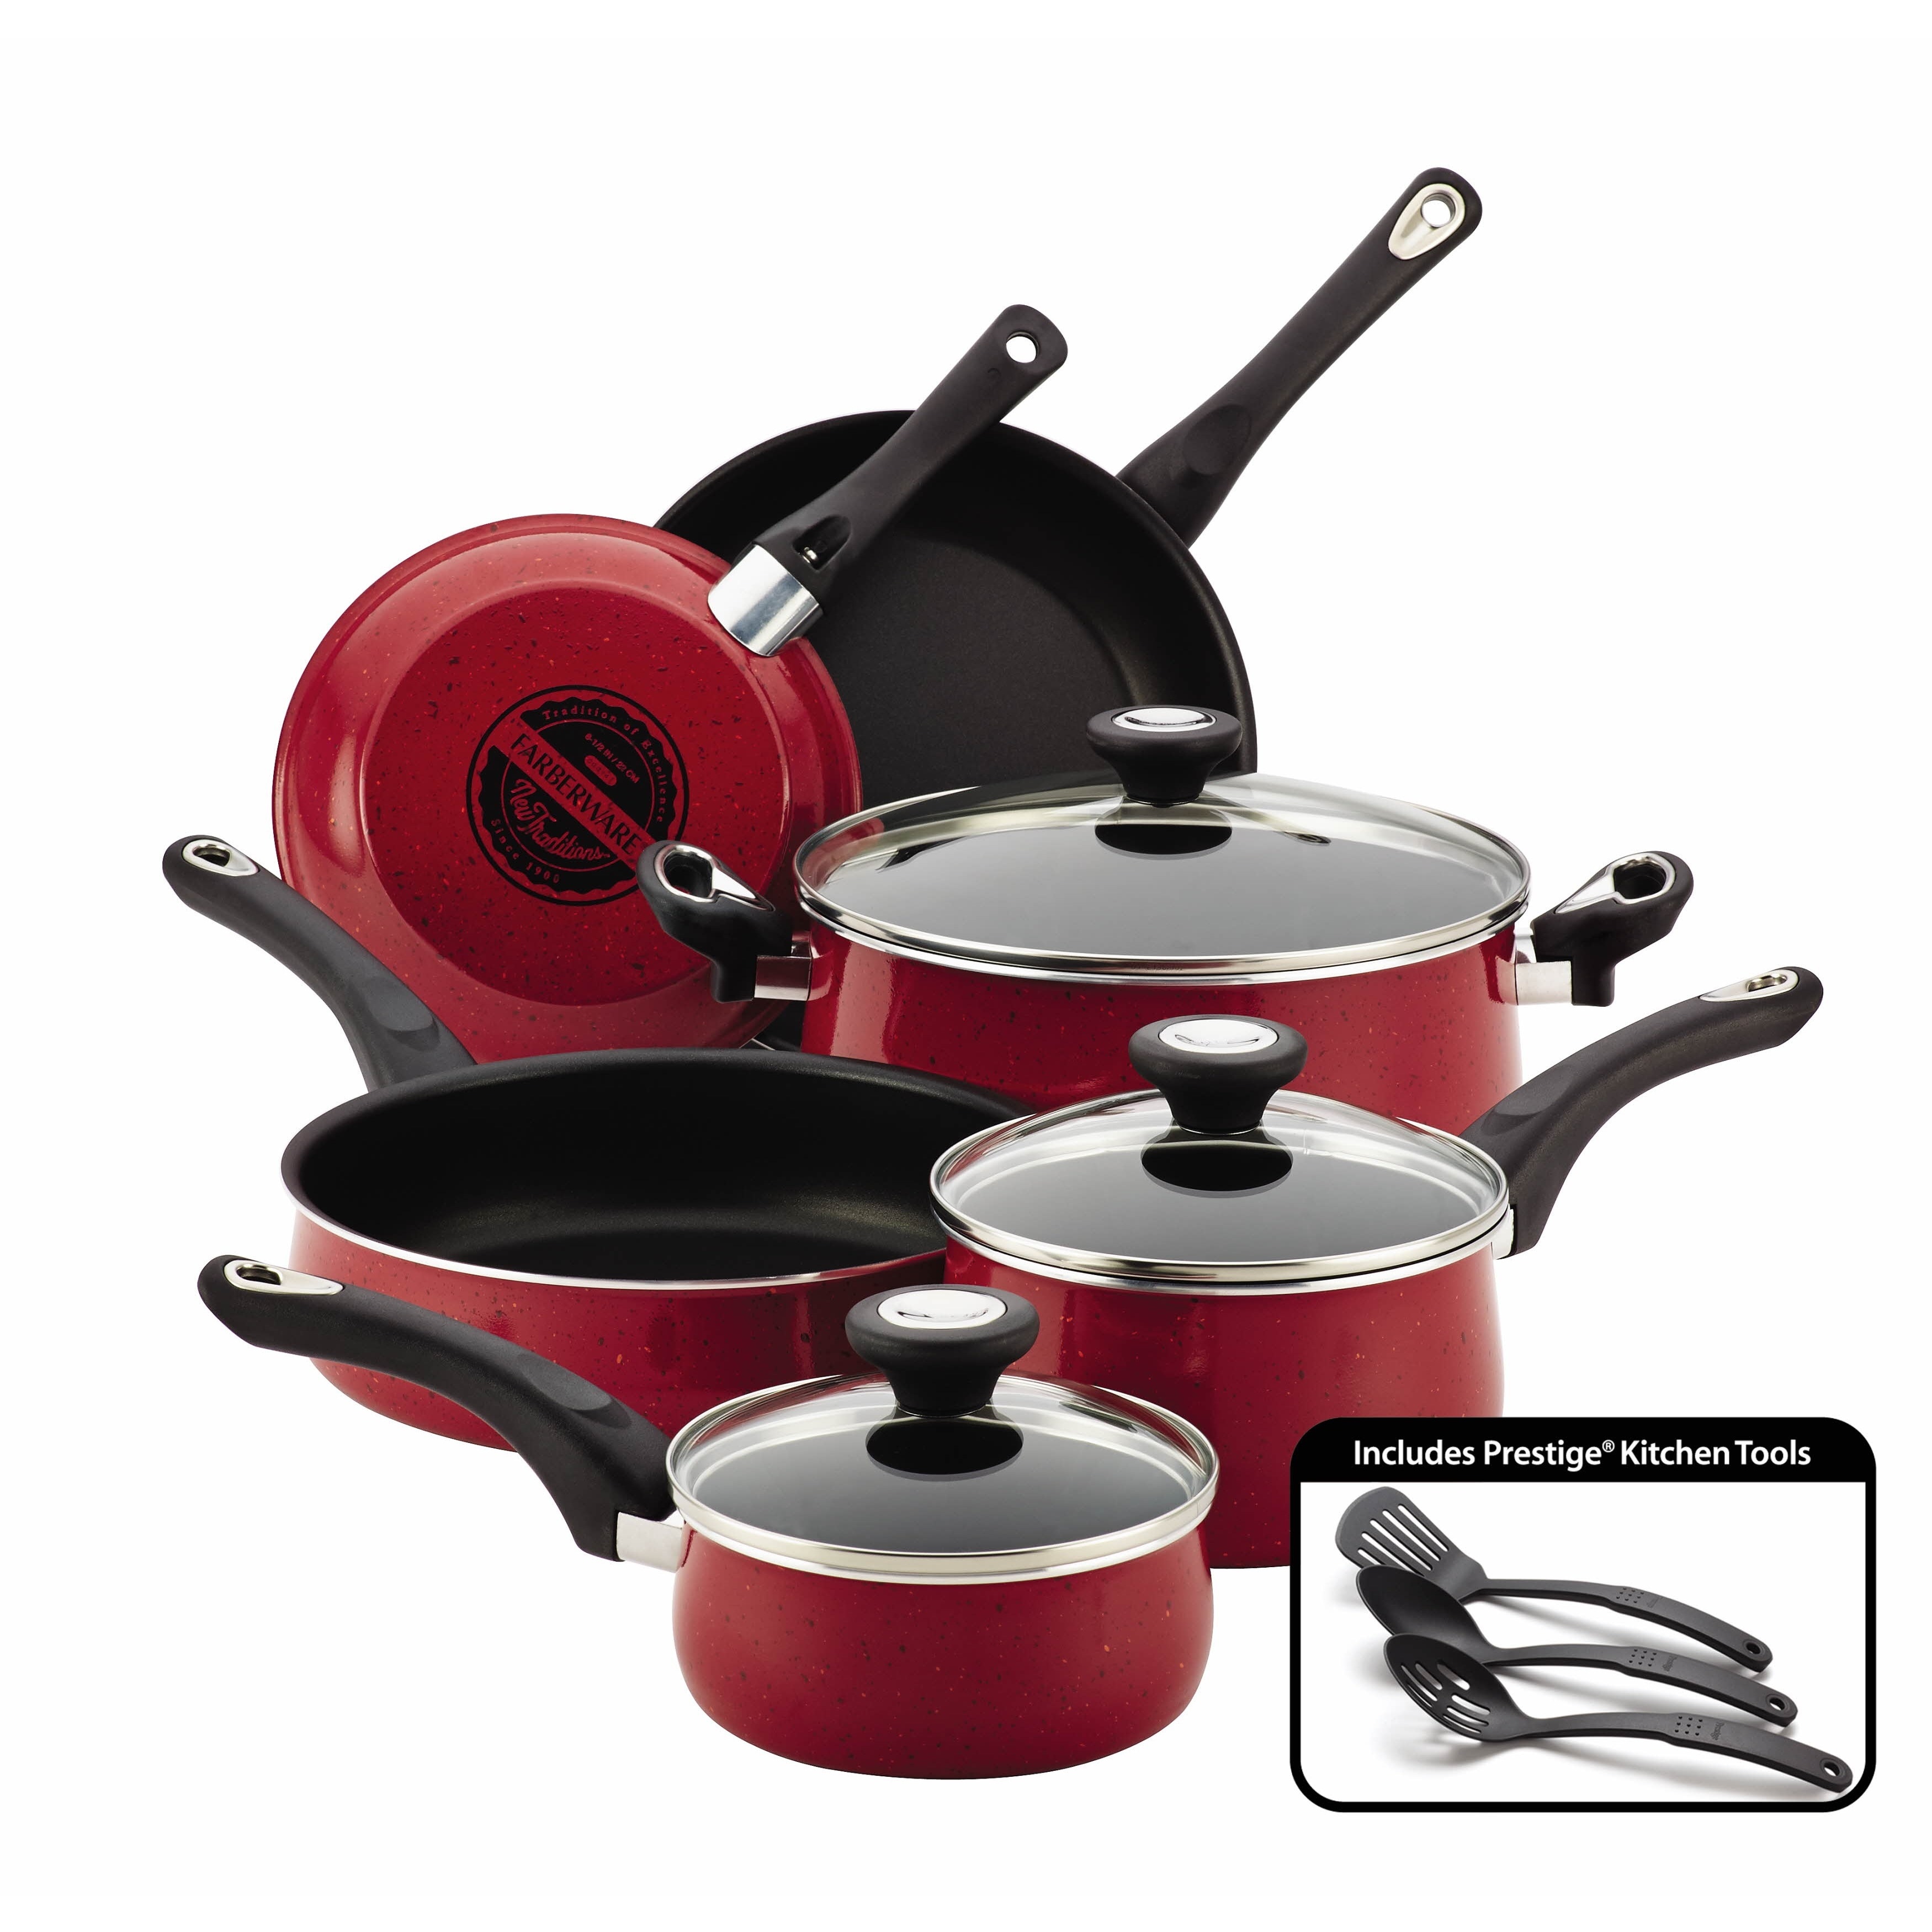 https://ak1.ostkcdn.com/images/products/8876332/Farberware-New-Traditions-Red-Speckled-Aluminum-Nonstick-12-piece-Cookware-Set-f4eacaed-a36d-4f56-958d-263edb9ffbe1.jpg